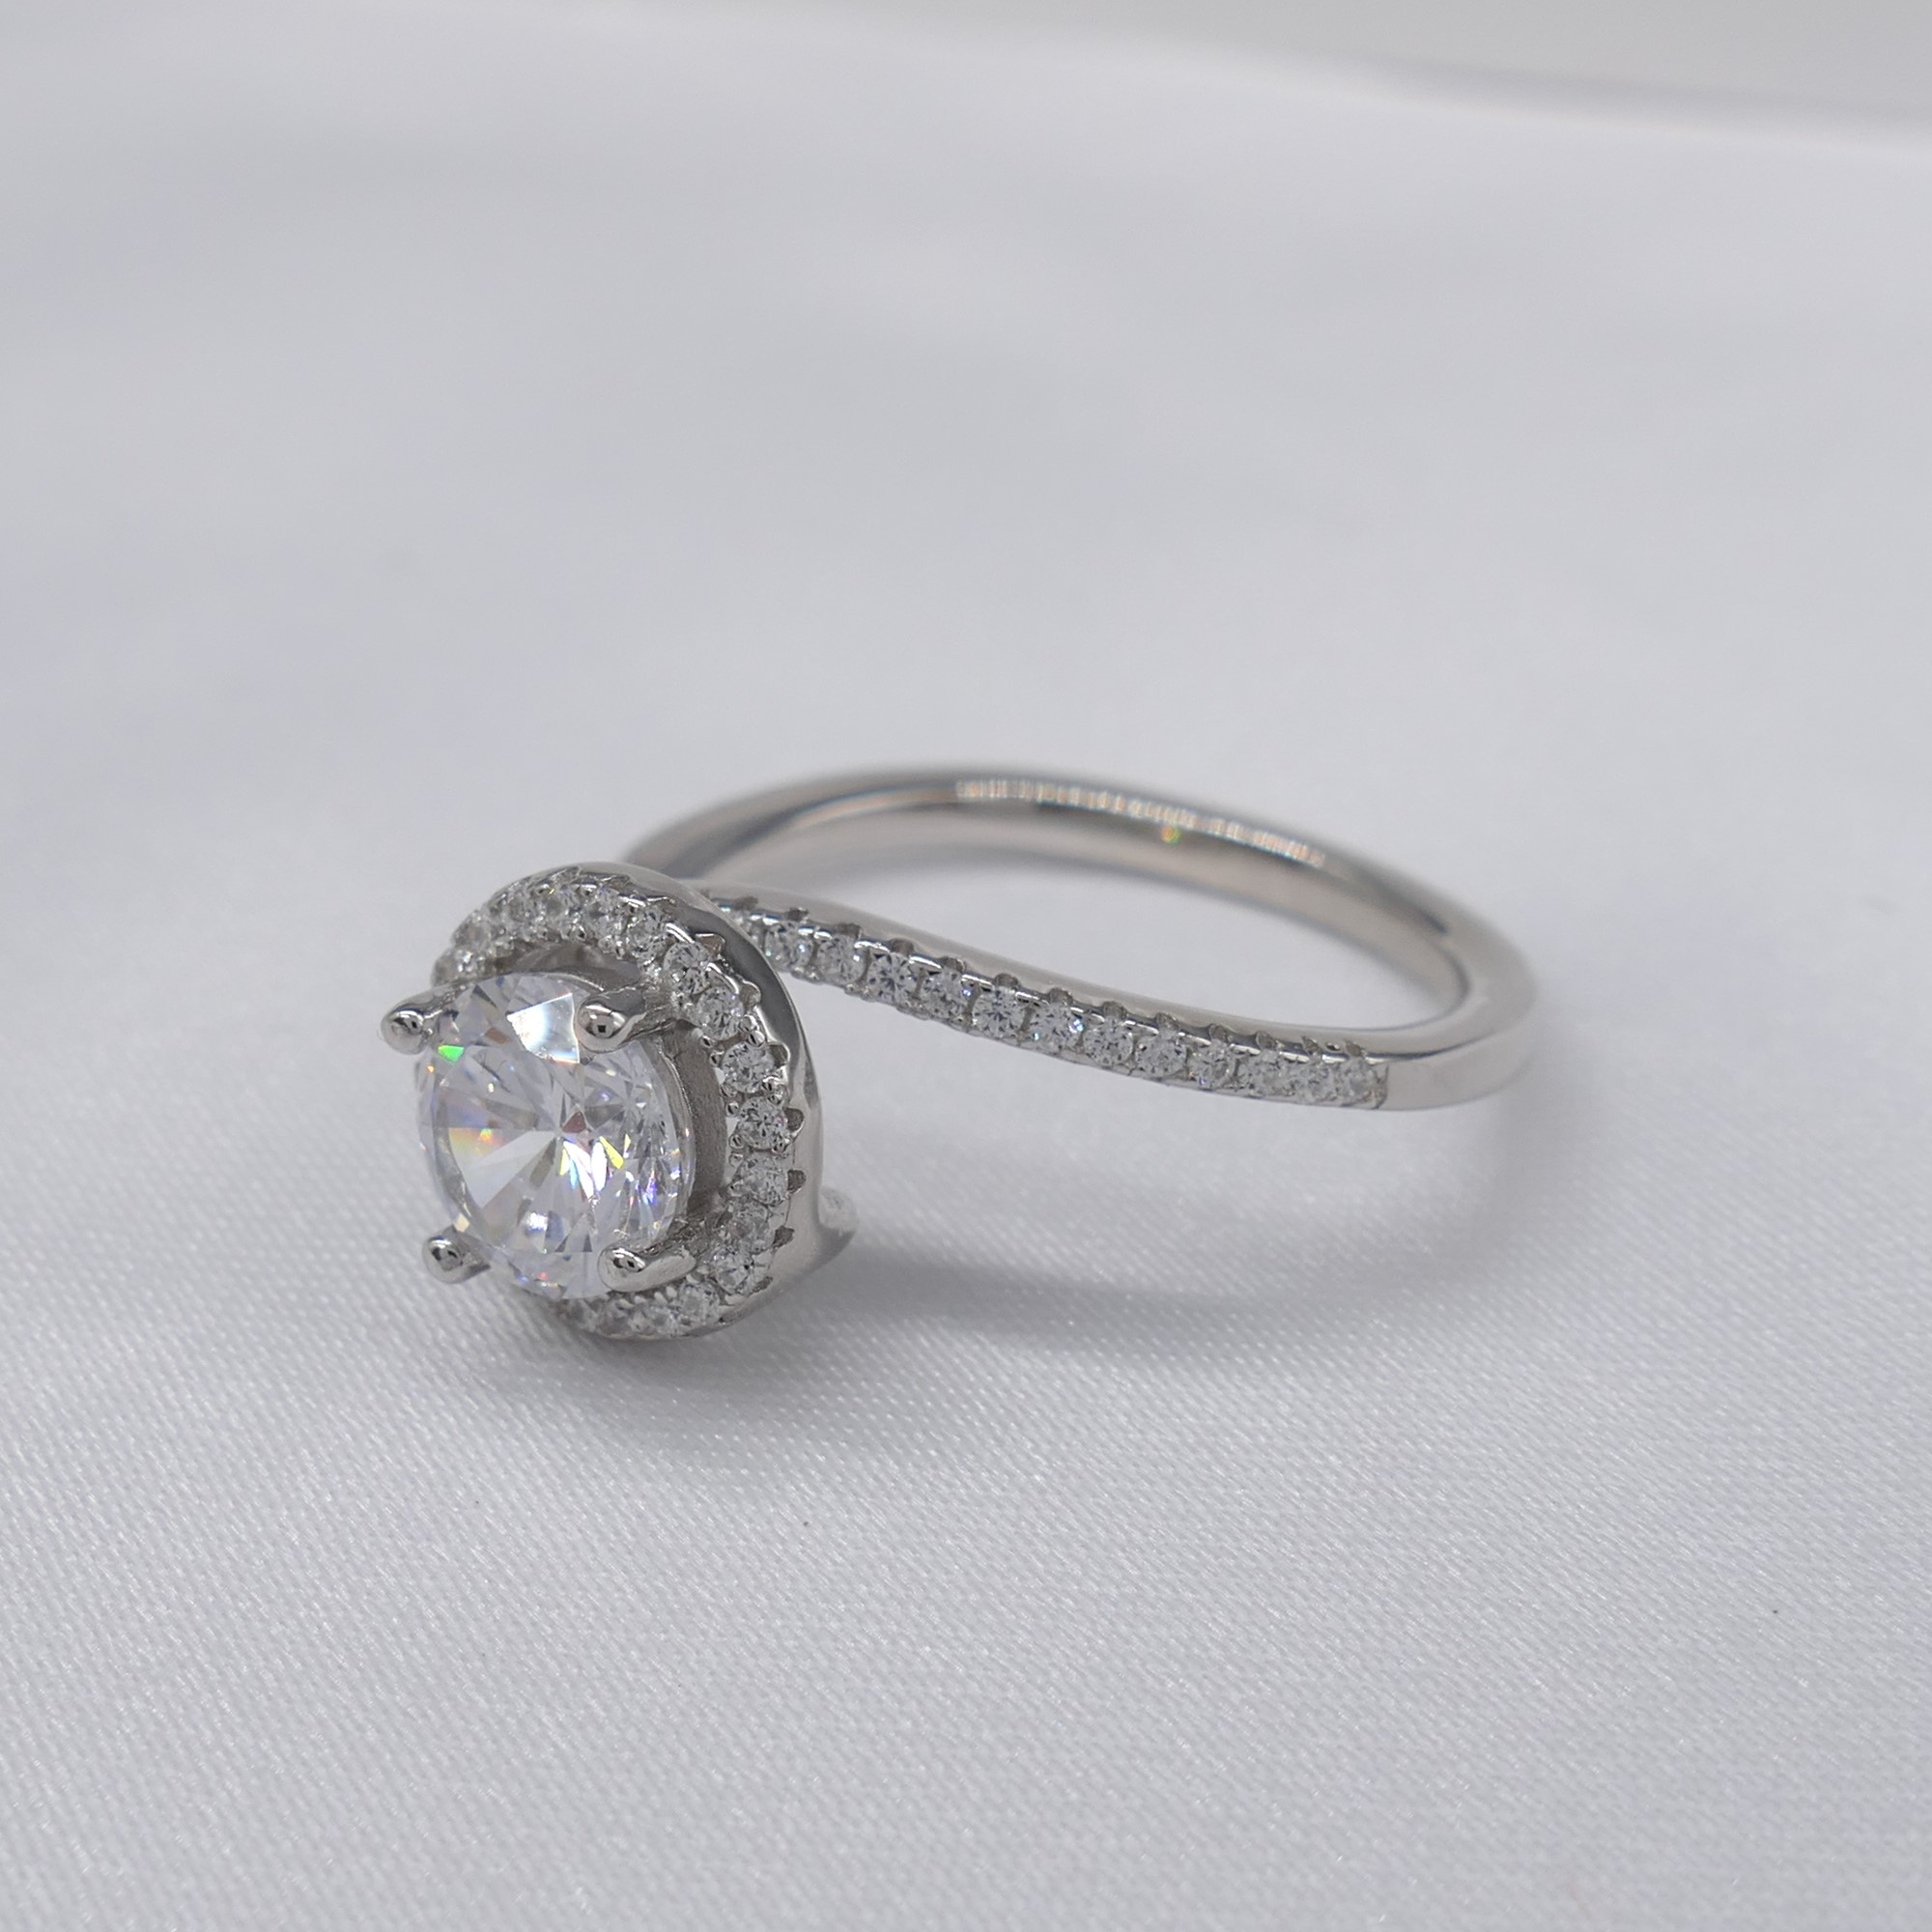 Silver Cubic Zirconia Halo and Twist Dress Ring - Image 2 of 6